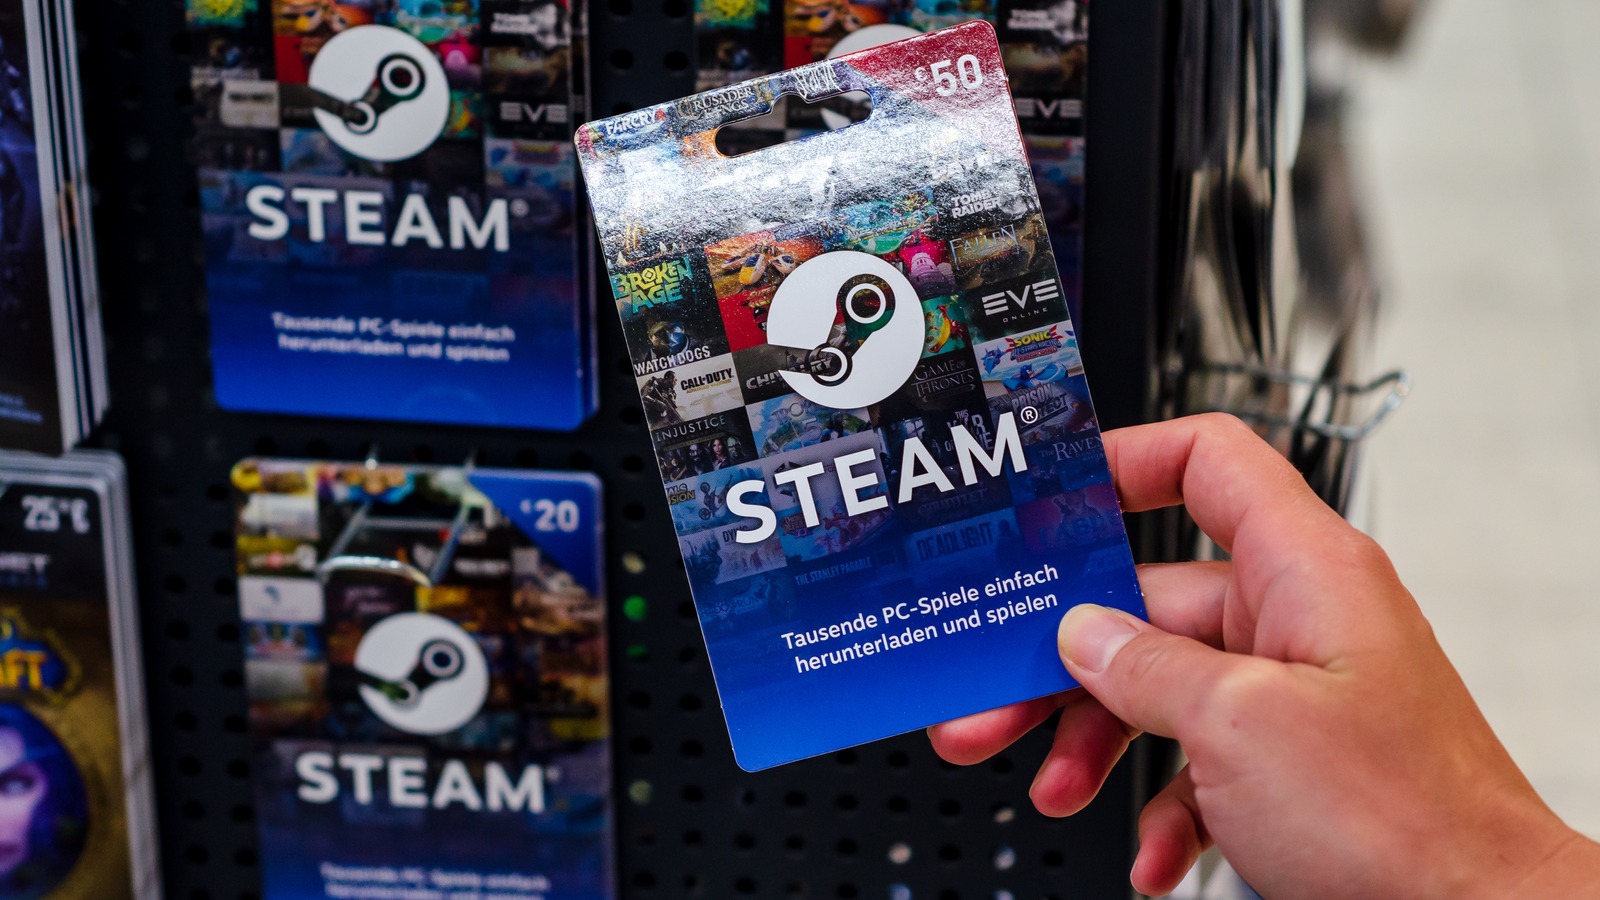 This STEAM Gift Card - can it be used for any game? Or only DOTA2 : r/Steam